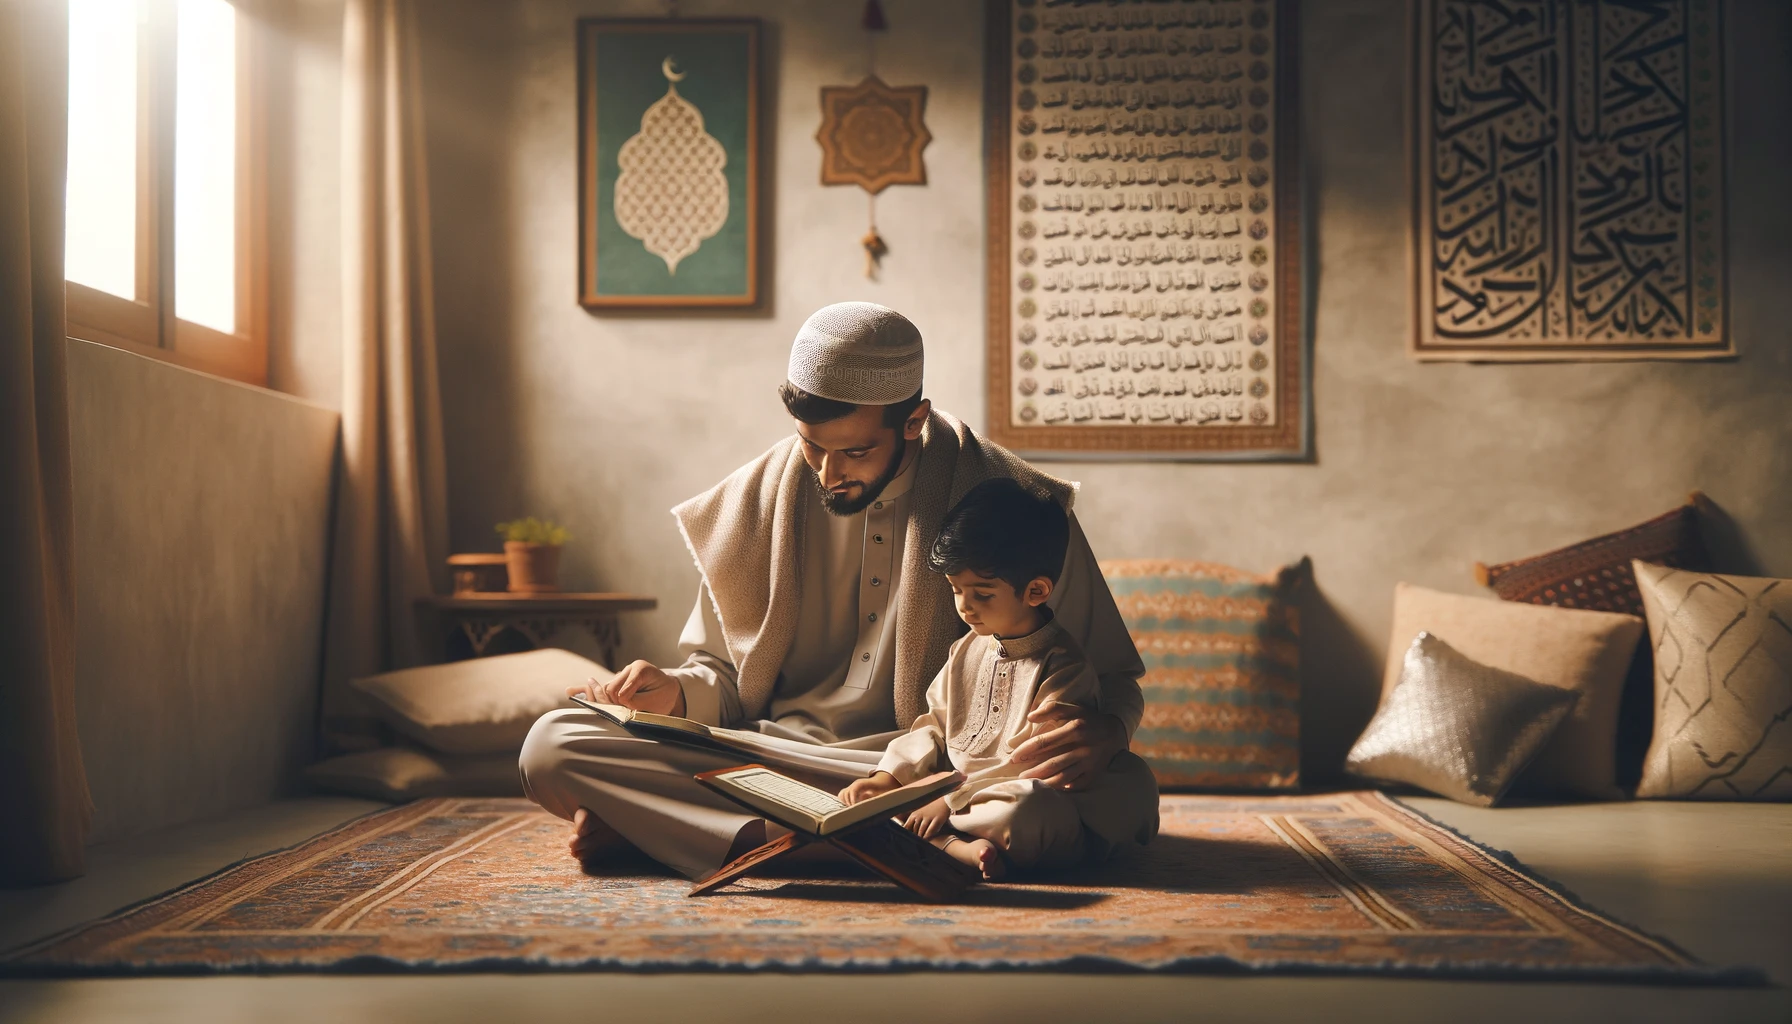 A parent and child sit on a traditional rug in a cozy room, studying the Quran together. The room is adorned with Islamic art, and sunlight softly illuminates the peaceful scene.